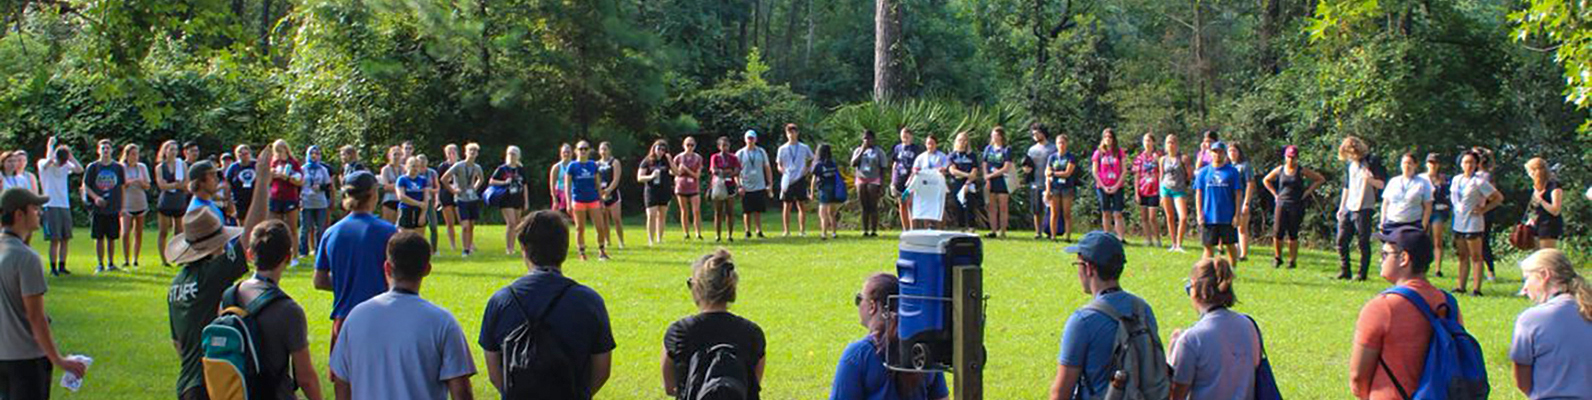 Students gathered in circle during a retreat